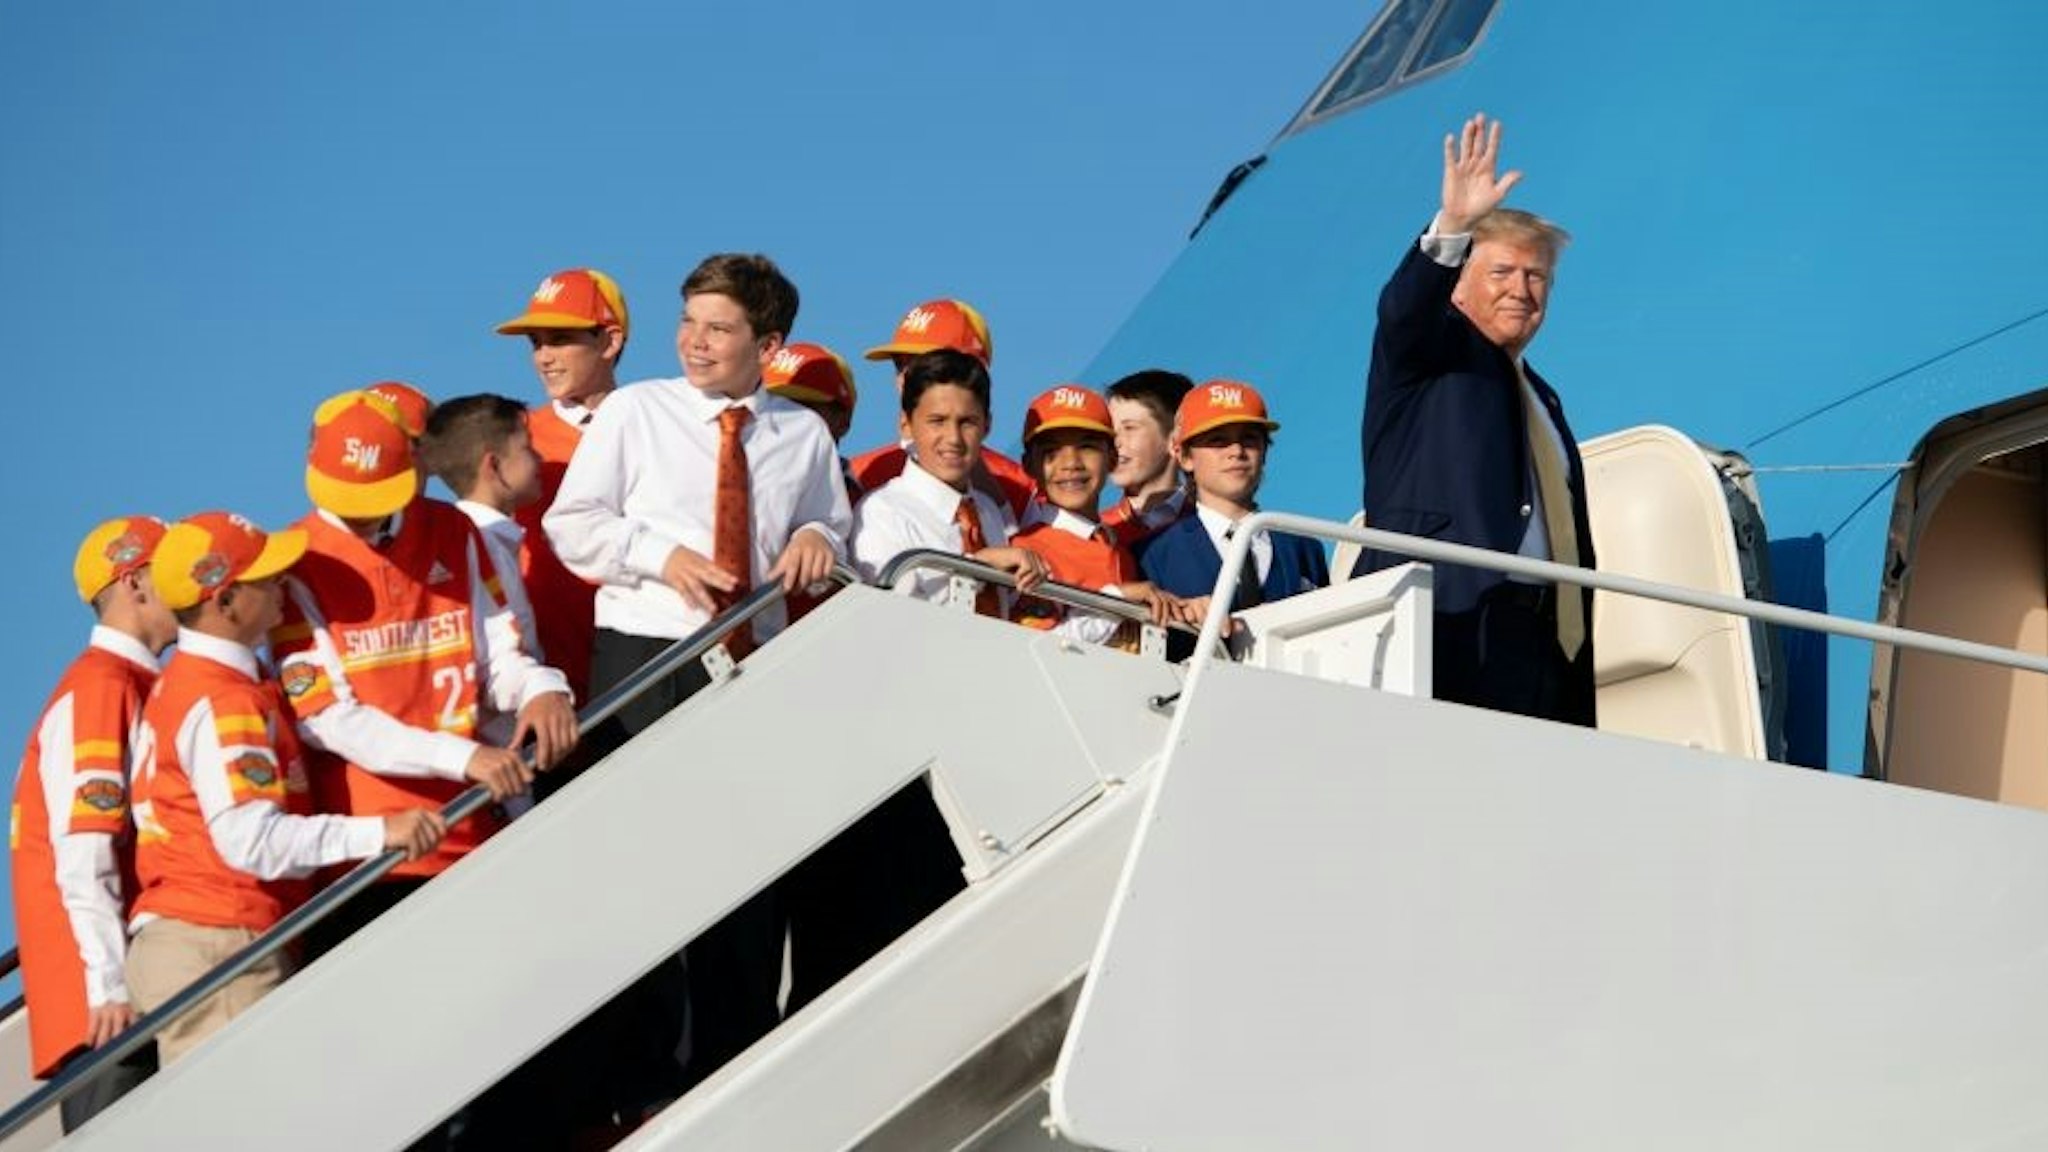 US President Donald Trump boards Air Force One with members of the Little League World Championship baseball team, the Eastbank All Stars of Louisiana, prior to departure from Joint Base Andrews in Maryland, October 11, 2019, as he travels to Louisiana, to hold a campaign rally. (Photo by SAUL LOEB / AFP) (Photo by SAUL LOEB/AFP via Getty Images)